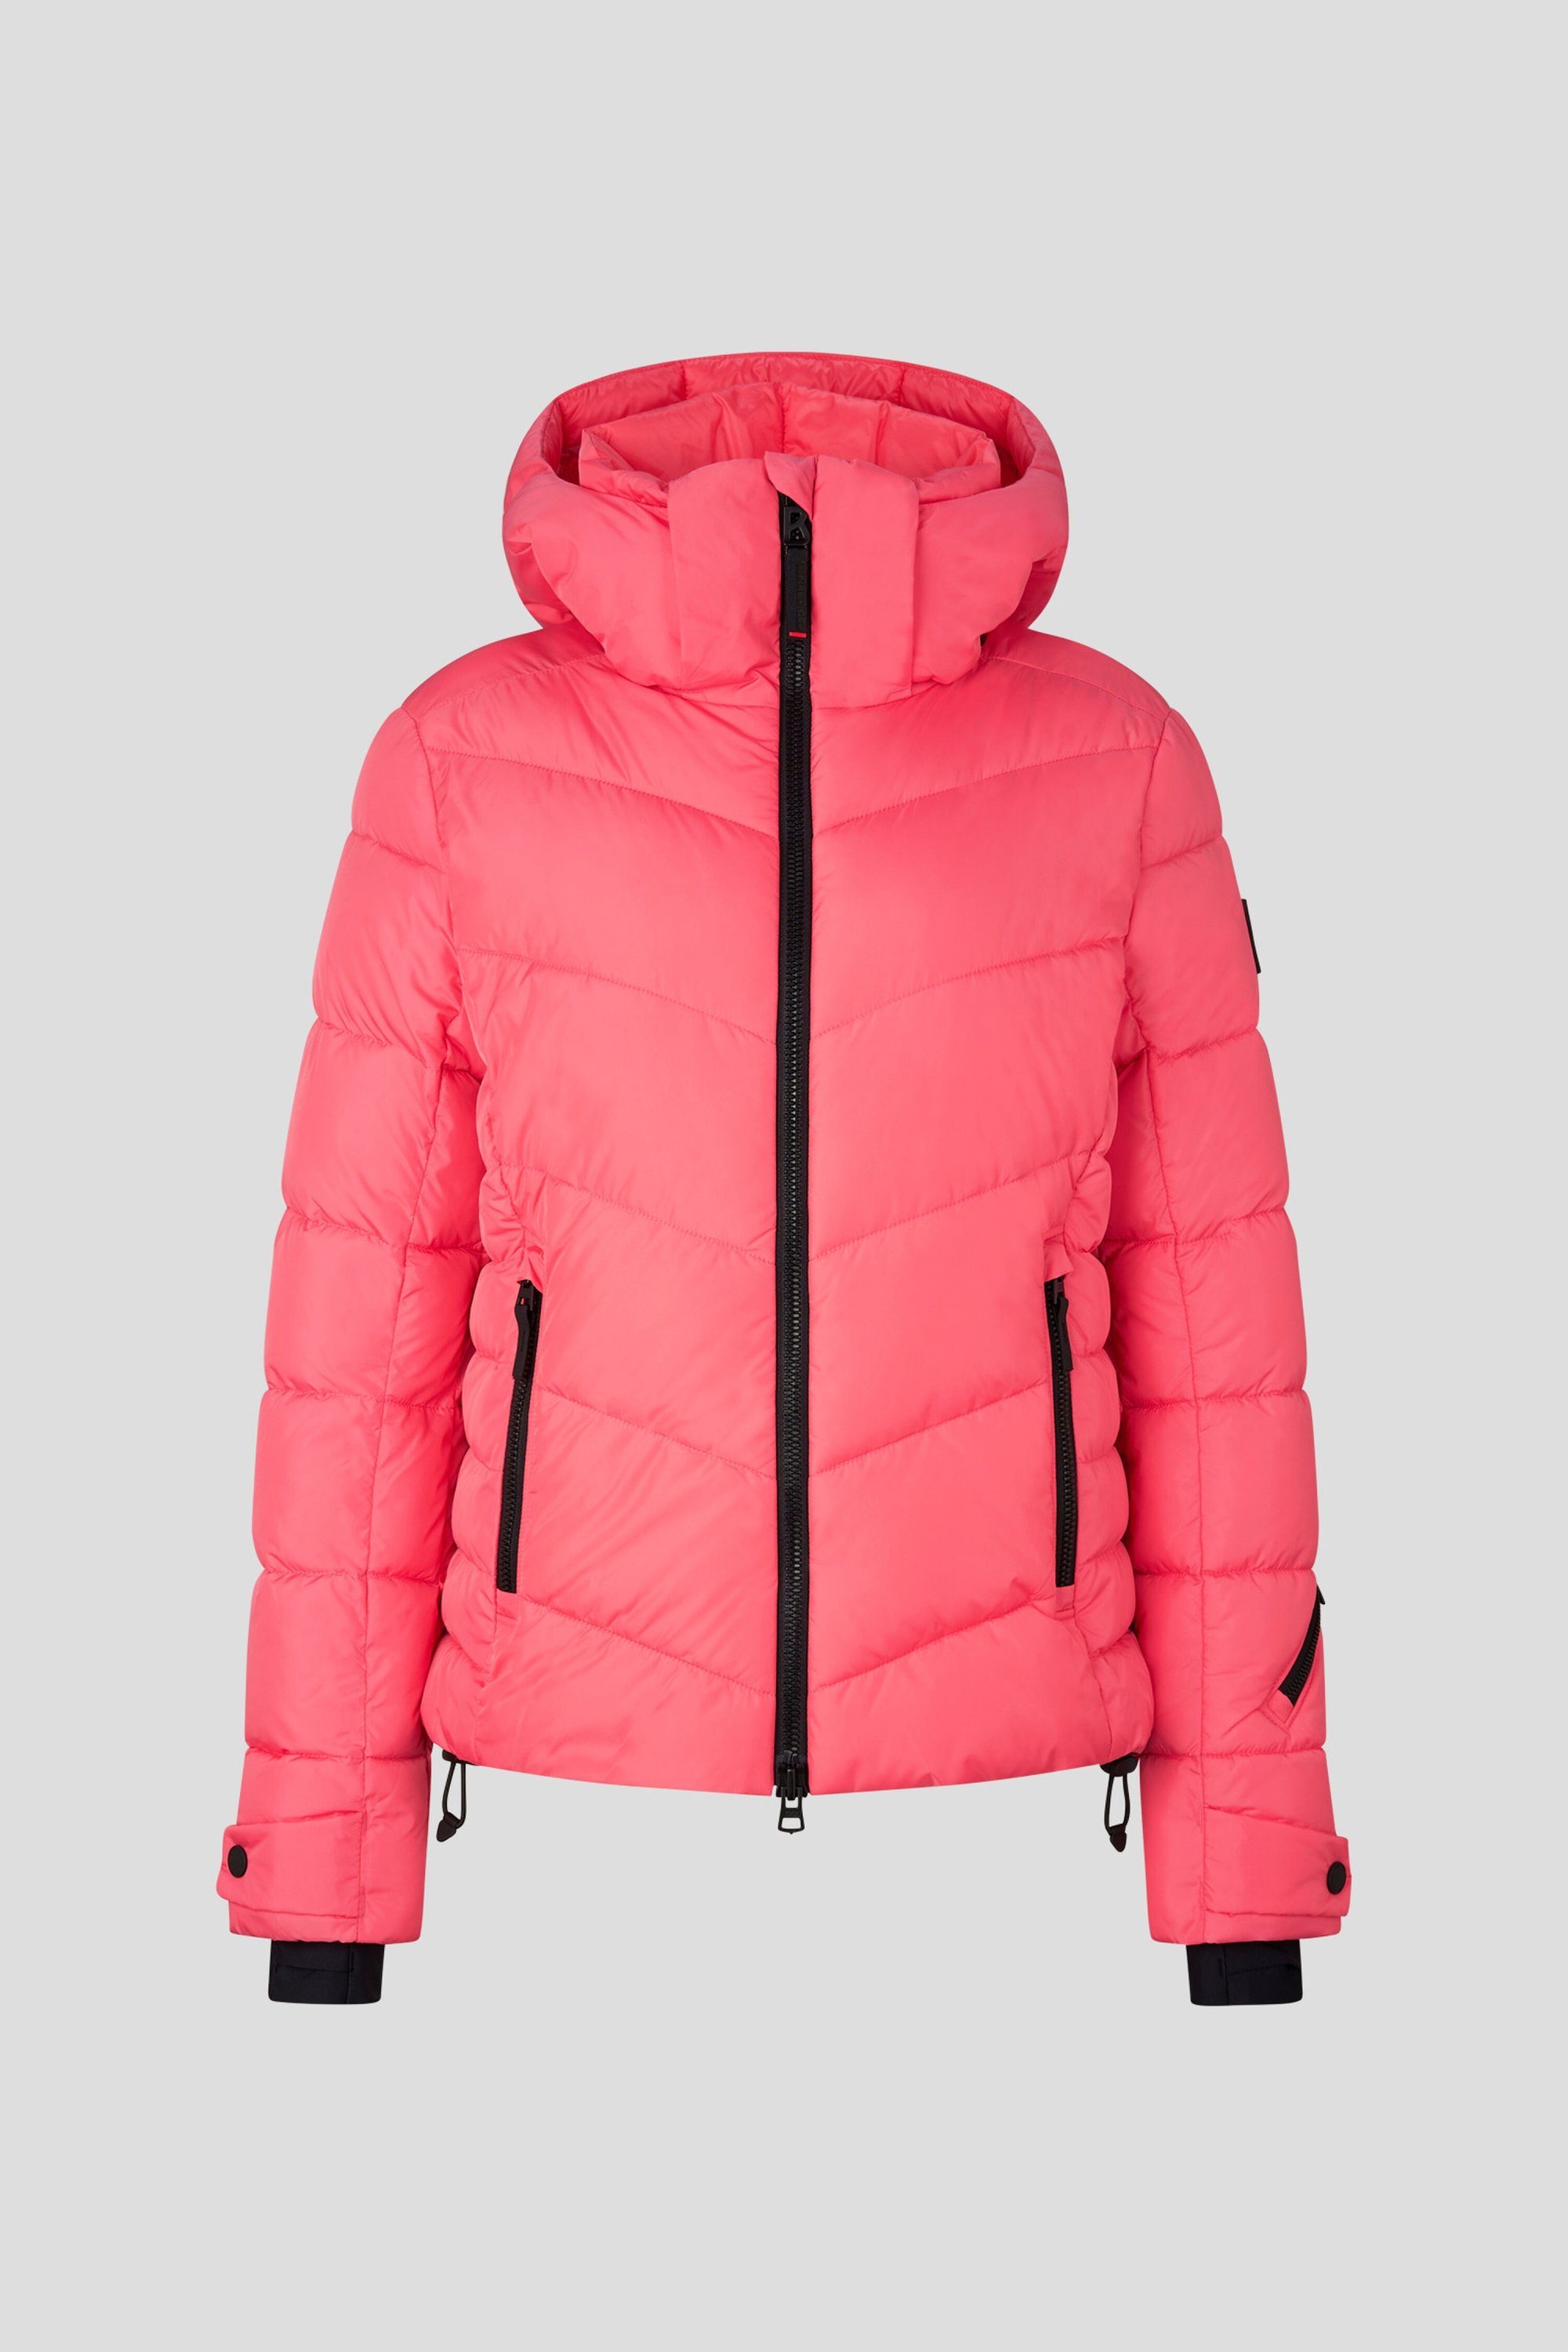 Kapuzensweatjacke SAELLY2 coral Bogner Fire pink Ice +